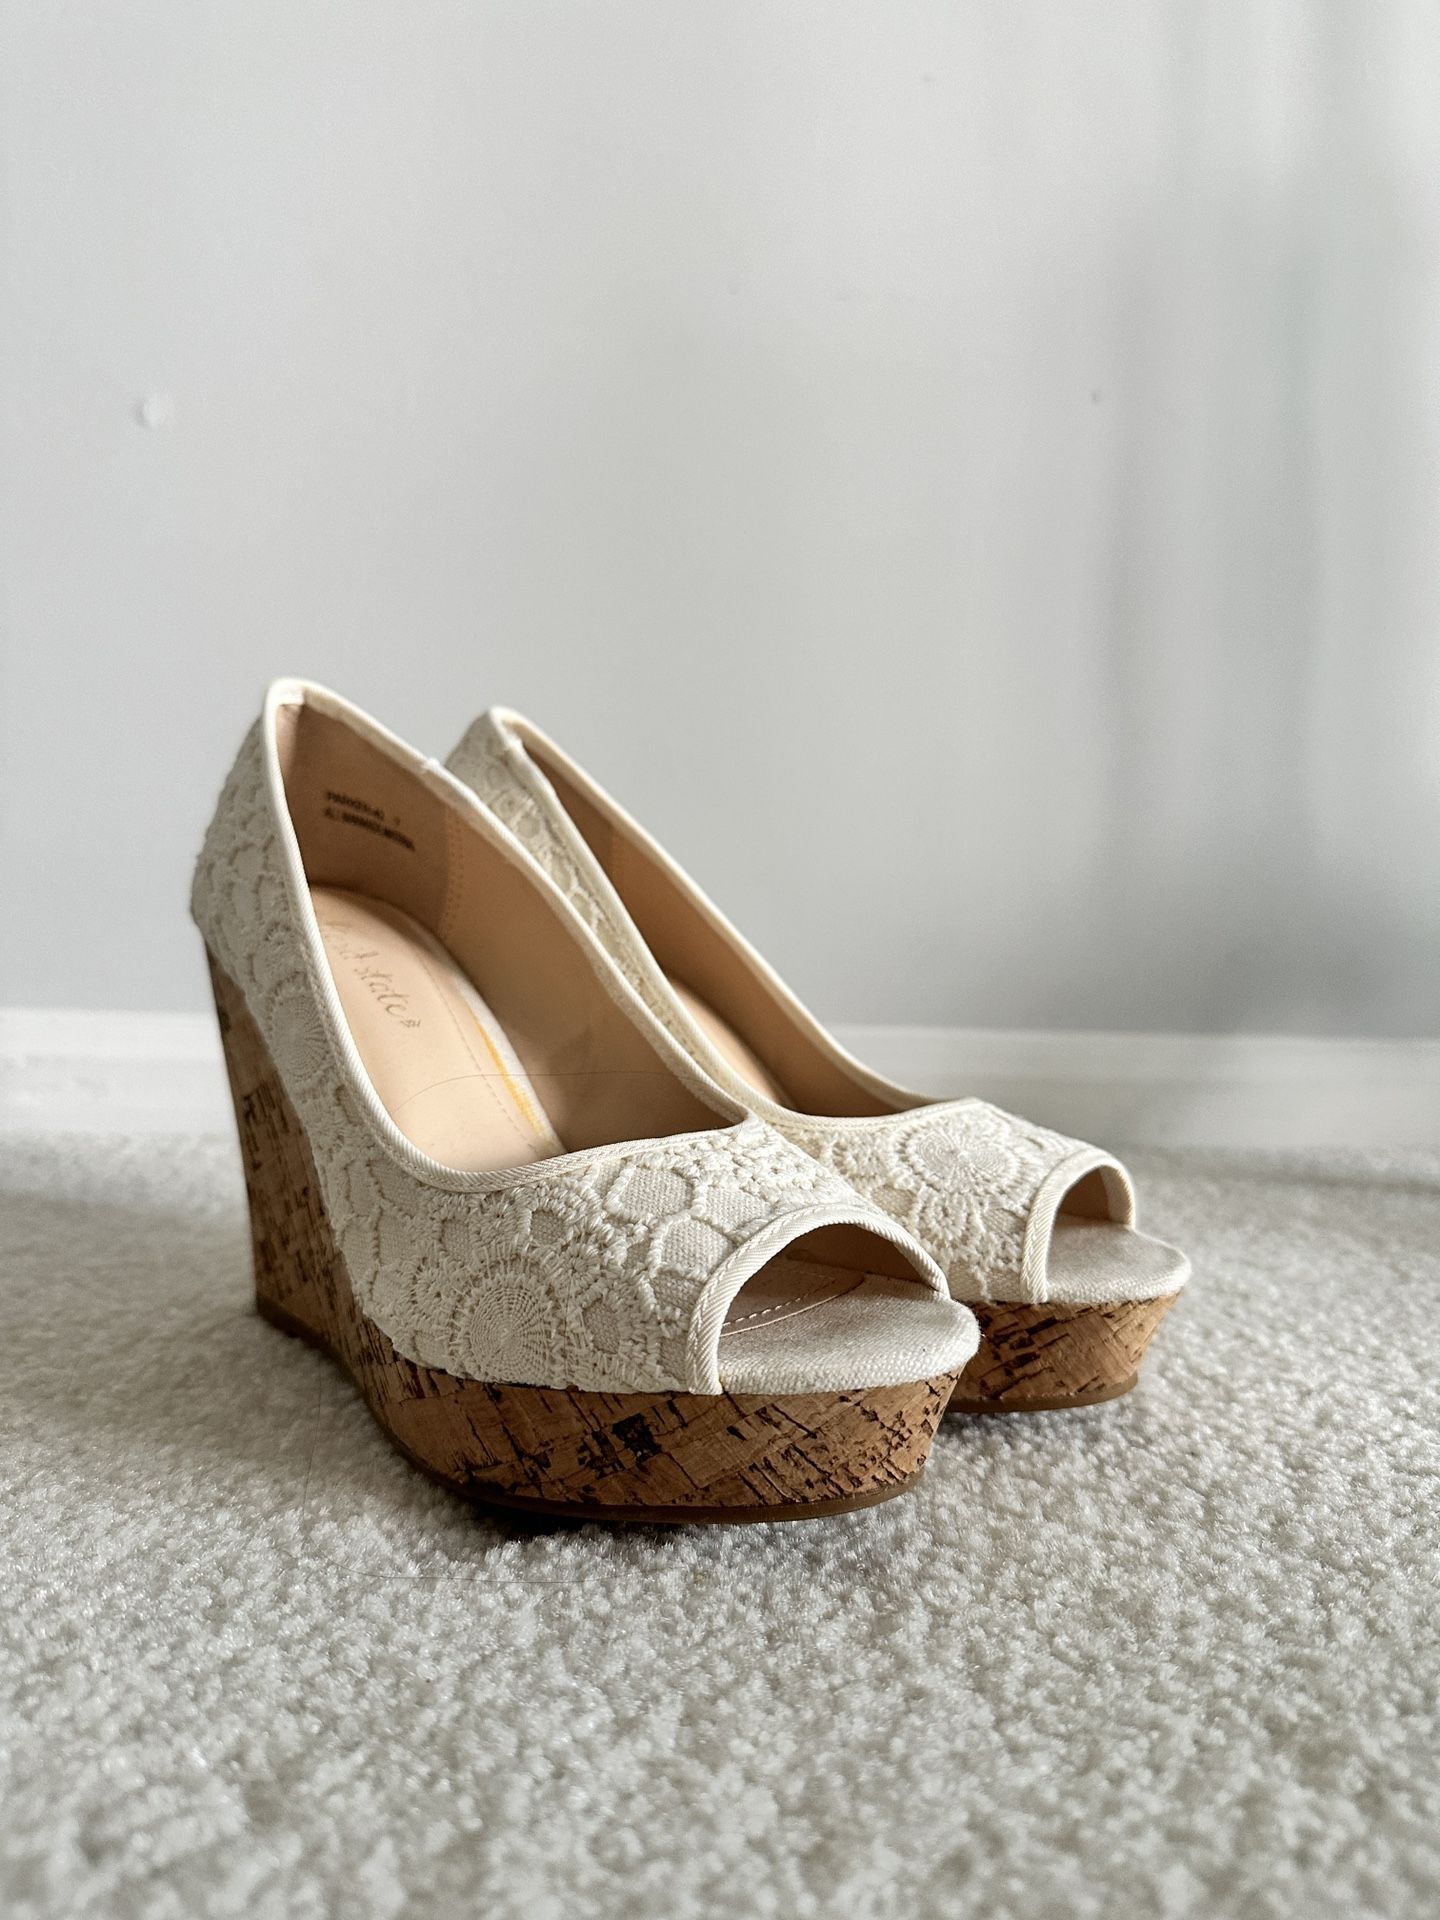 Altar'd State Laced Wedges - Never Worn!